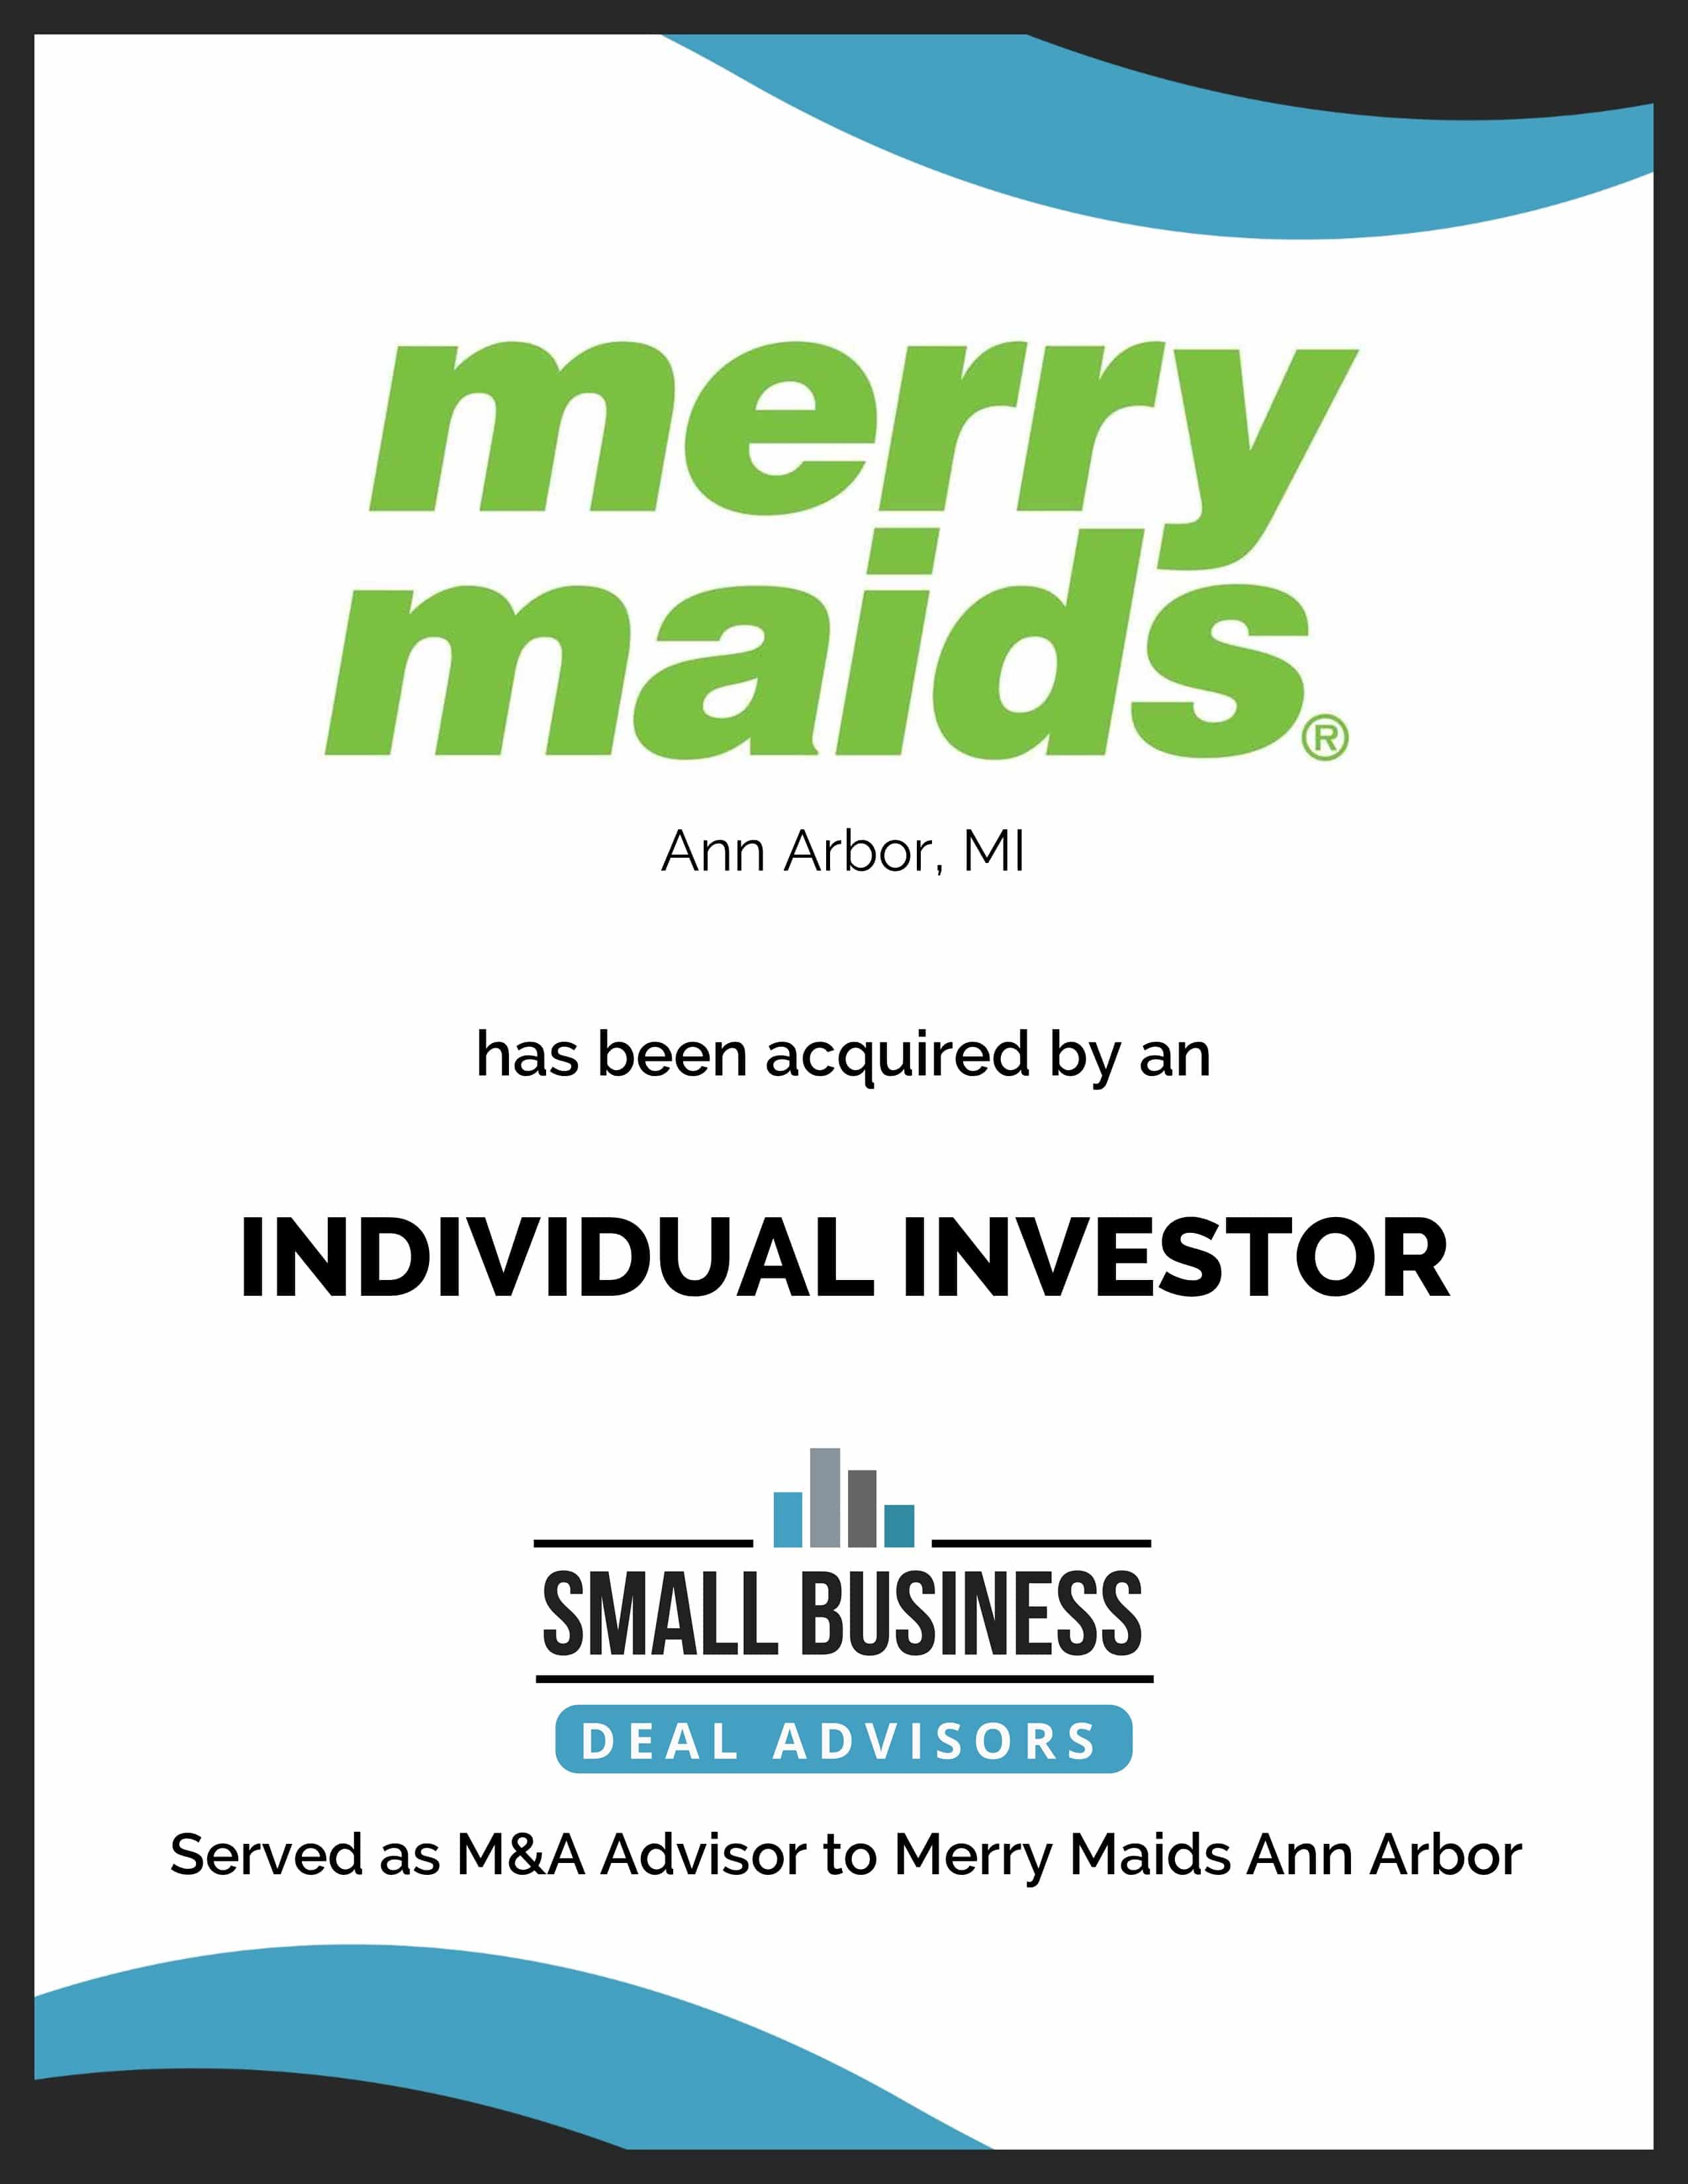 Merry Maids Ann Arbor Sold to an Individual Investor